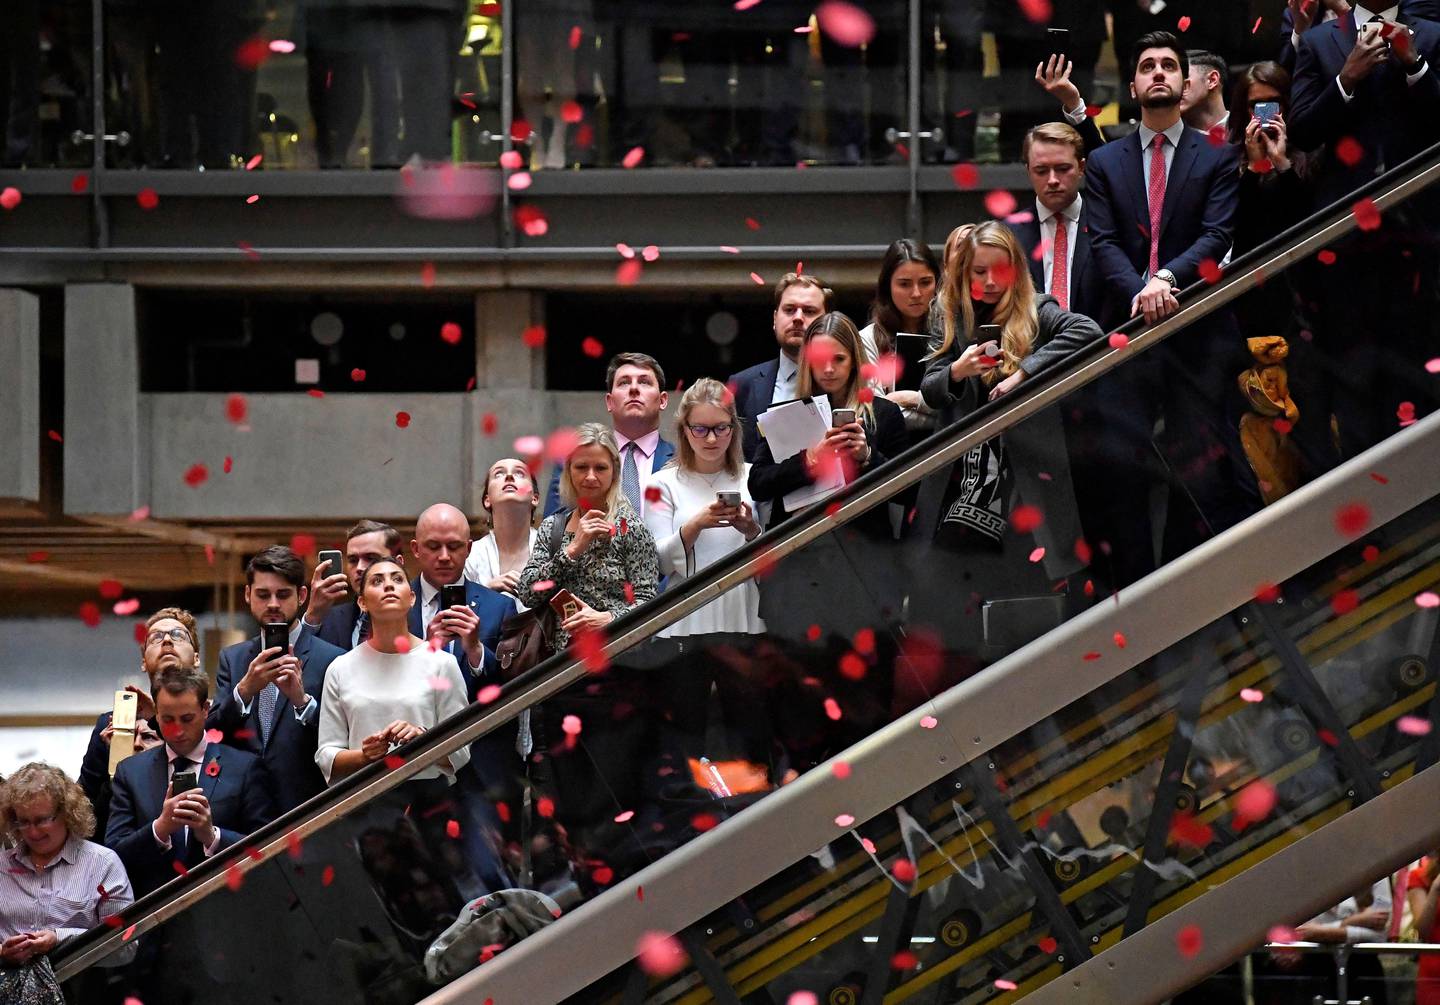 Workers stand for a poppy drop during a Remembrance Service at the Lloyd's building in the City of London, Britain, November 9, 2018. REUTERS/Toby Melville